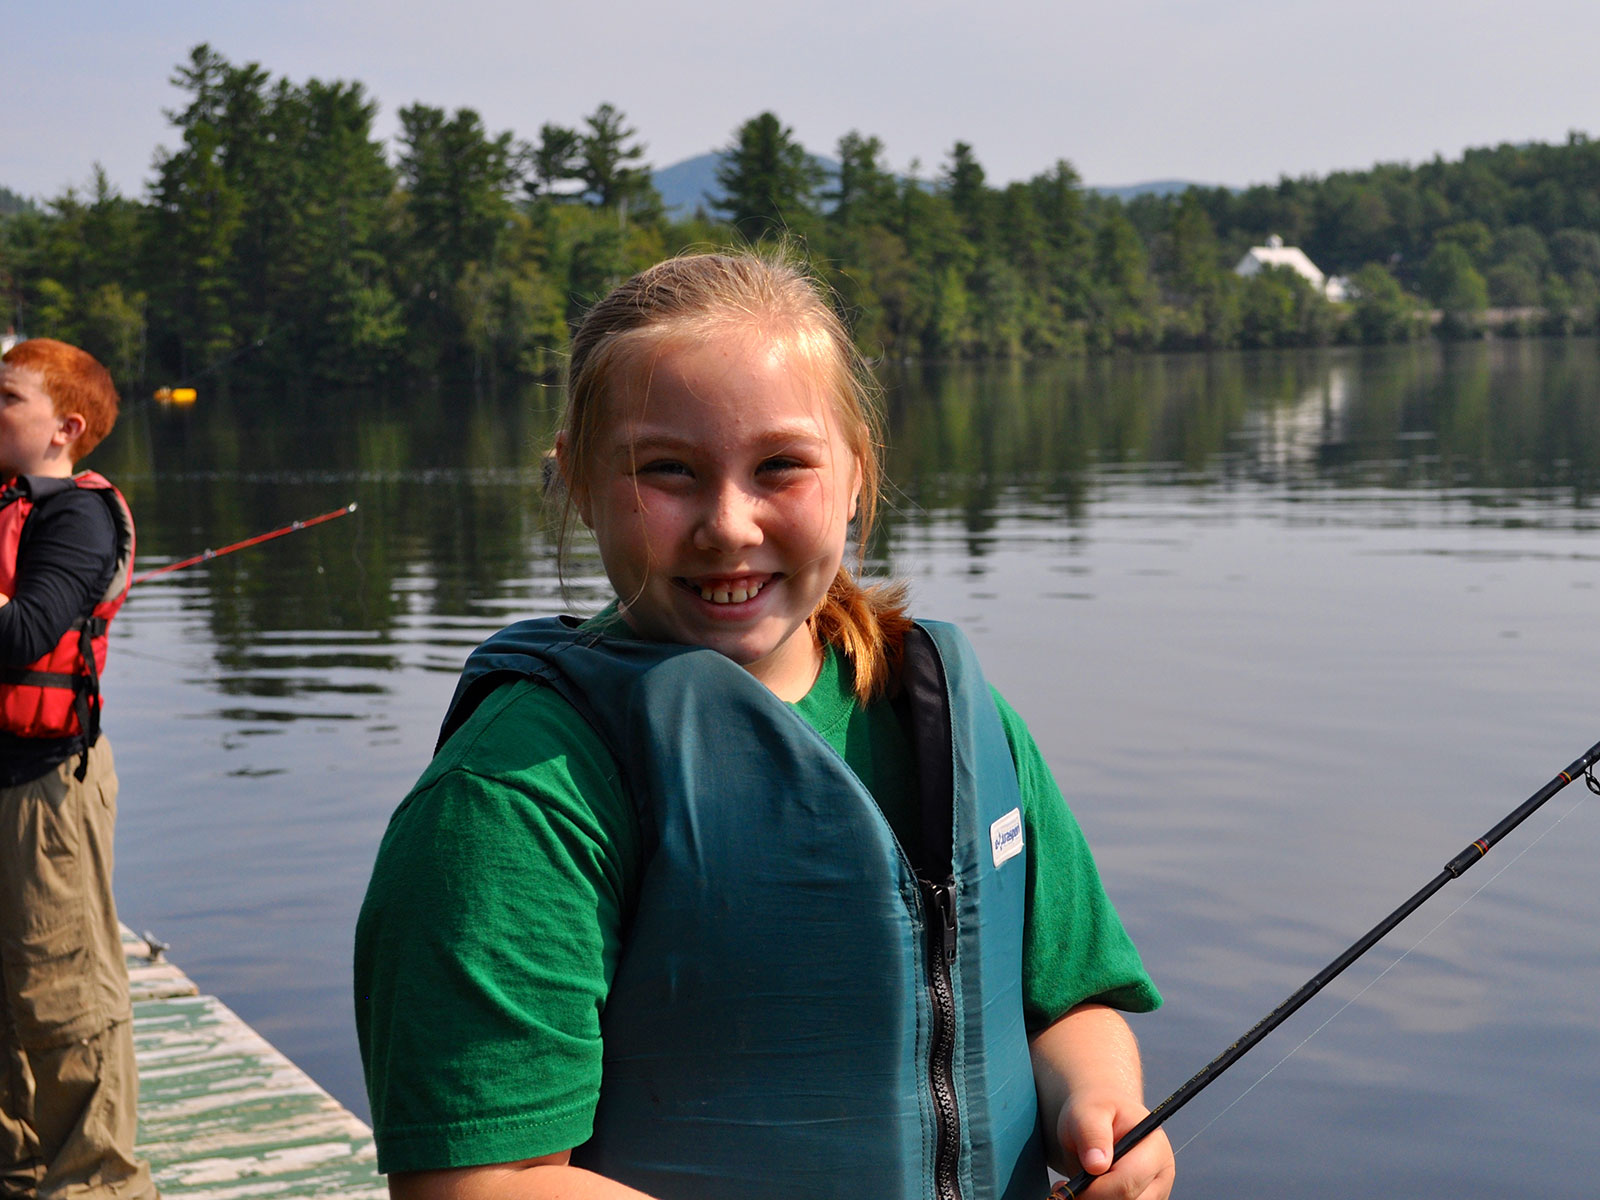 Fishing Camp (ages 10-13) - University of Maine 4-H Camp